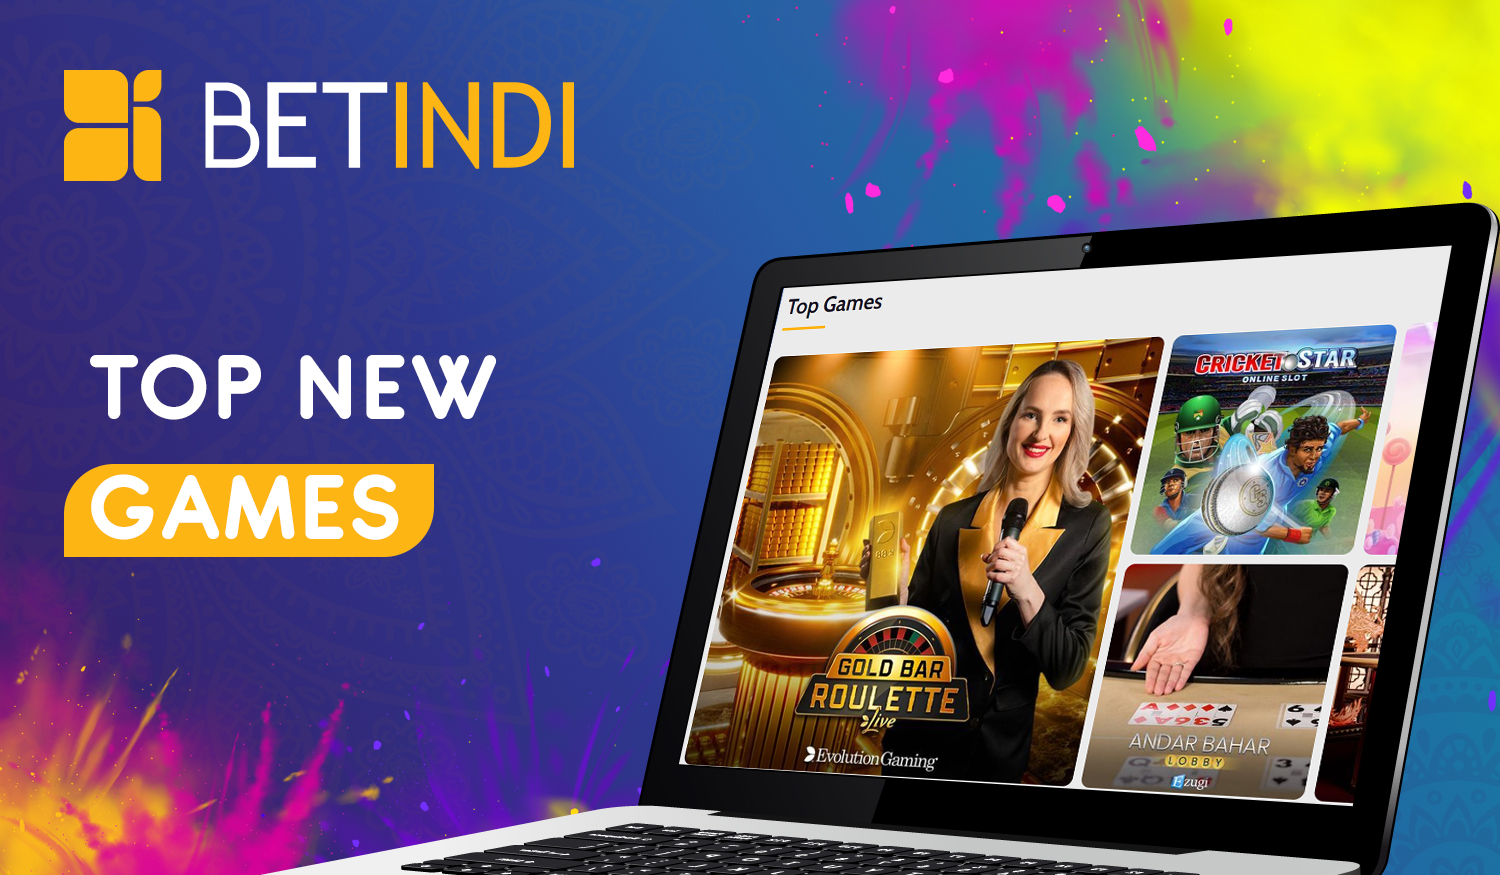 New games for Indian users in the Betindi section casino